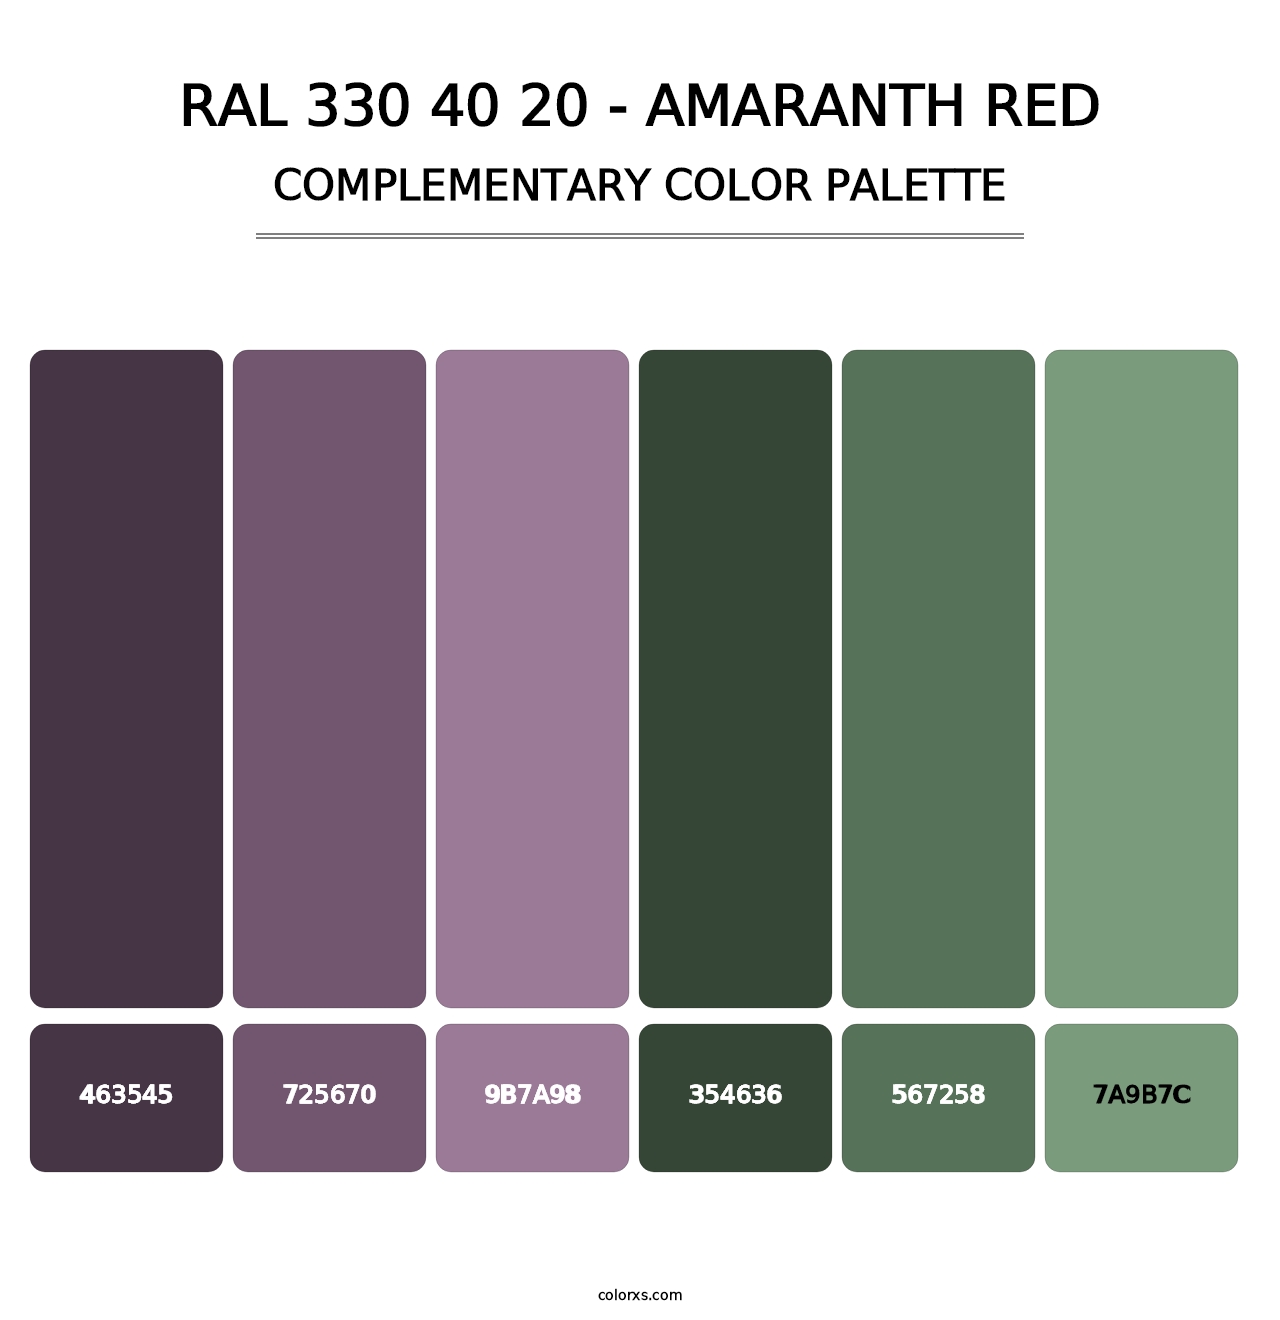 RAL 330 40 20 - Amaranth Red - Complementary Color Palette